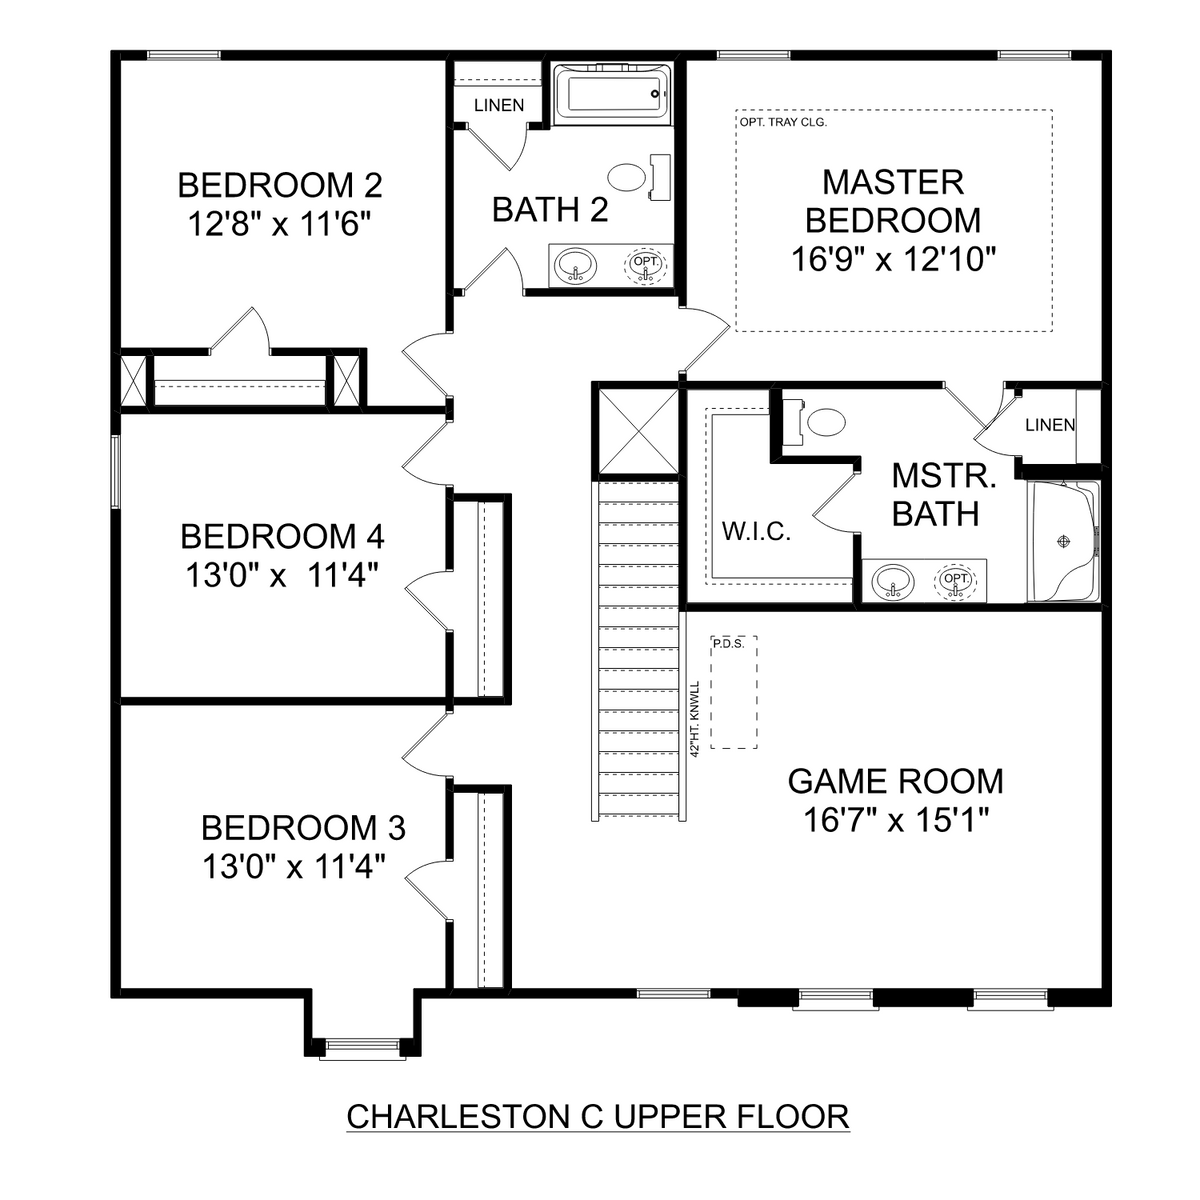 2 - The Charleston C floor plan layout for 116 Holly Grove Lane in Davidson Homes' Durham Farms community.